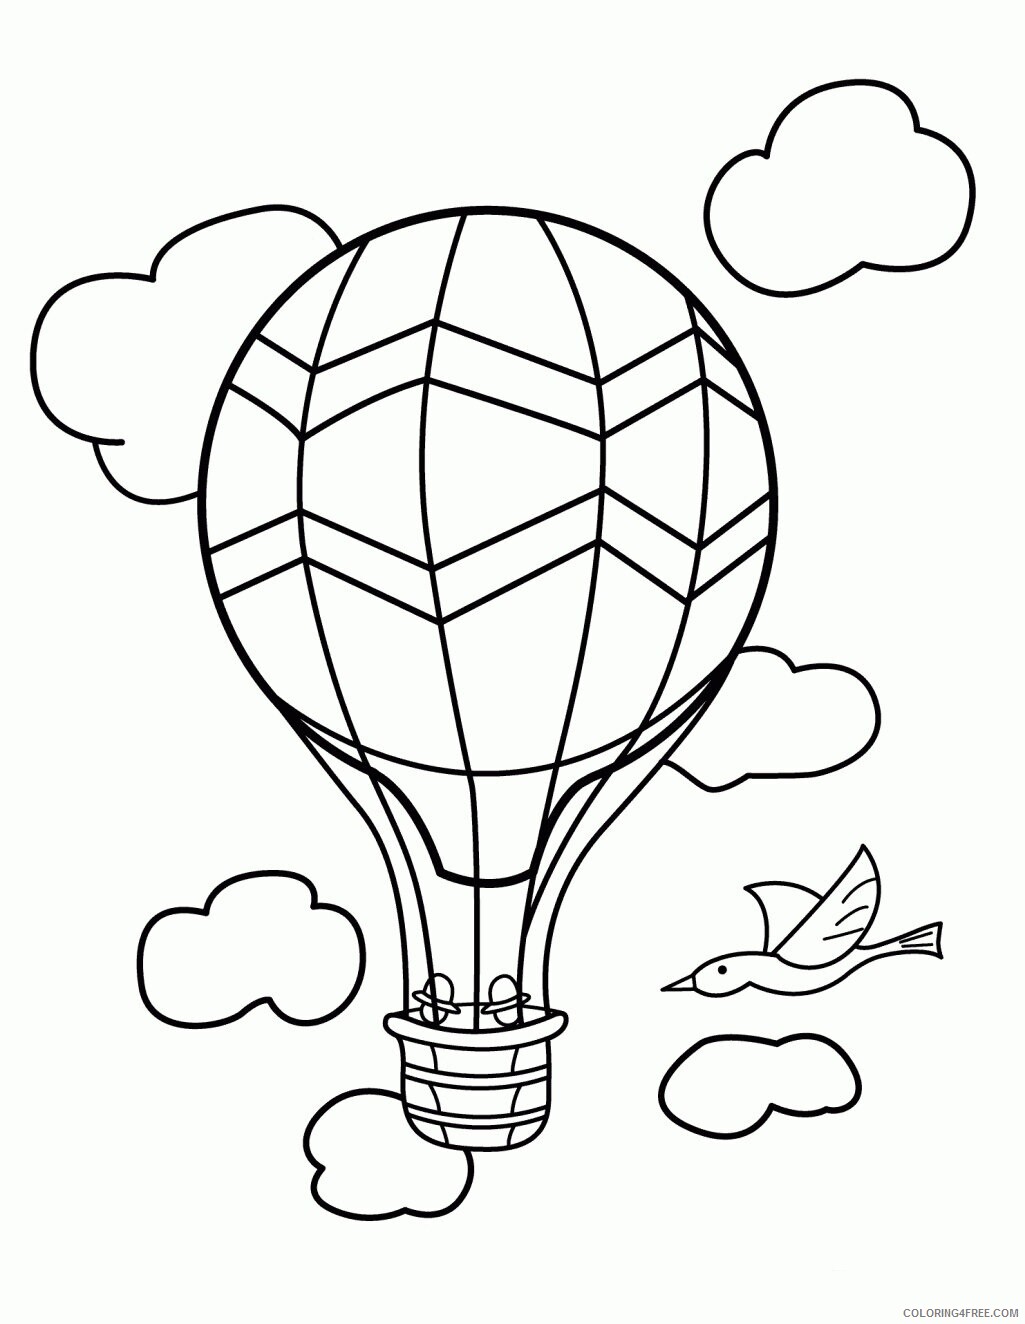 Air Transportation Vehicle Coloring Page Printable Sheets Air Transport Pictures Step 2021 a Coloring4free